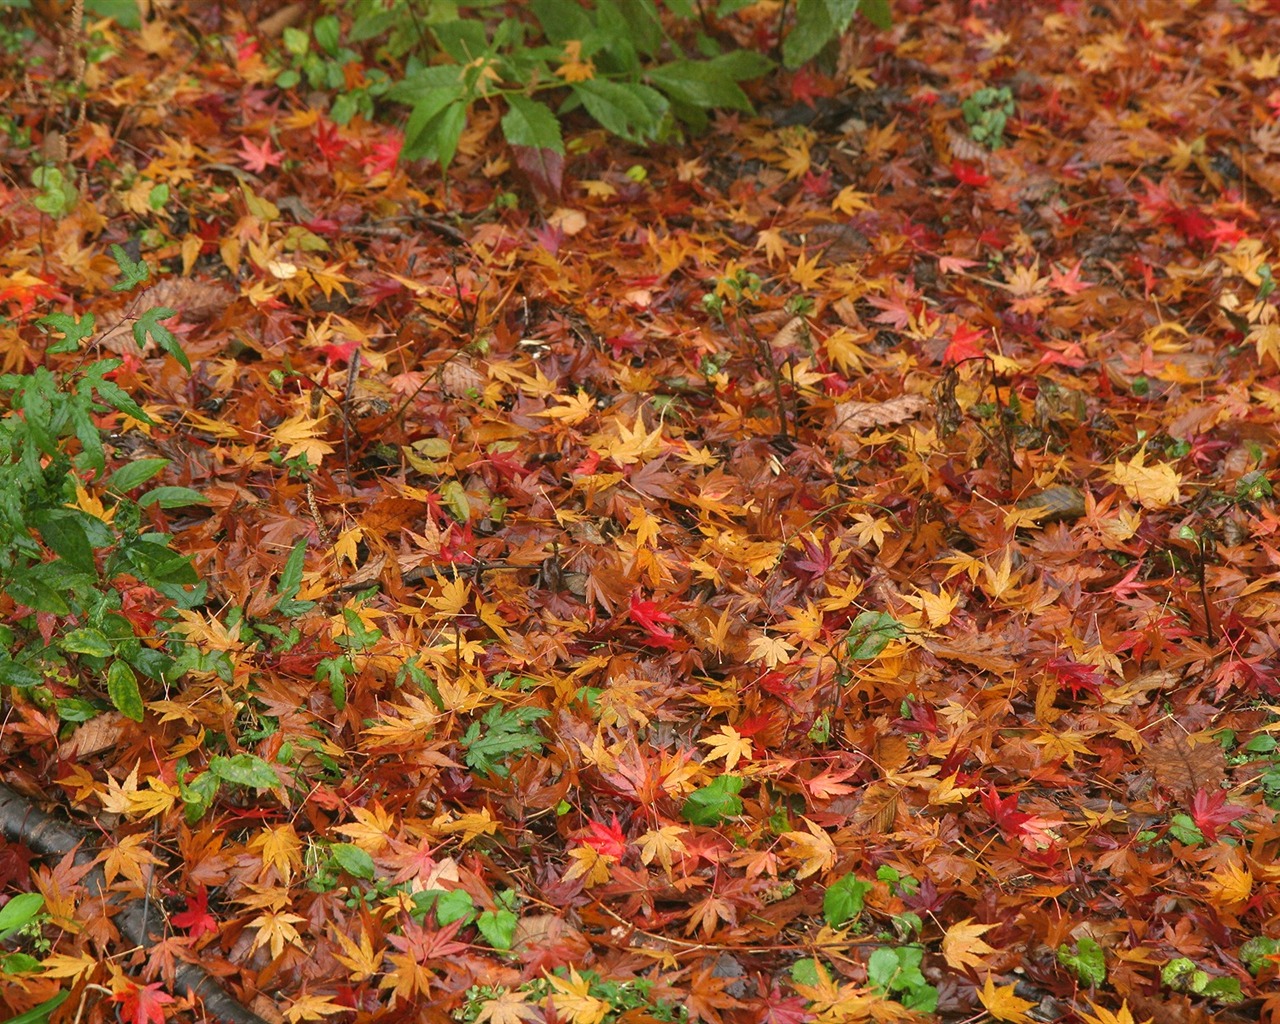 Maple Leaf wallpaper paved way #6 - 1280x1024